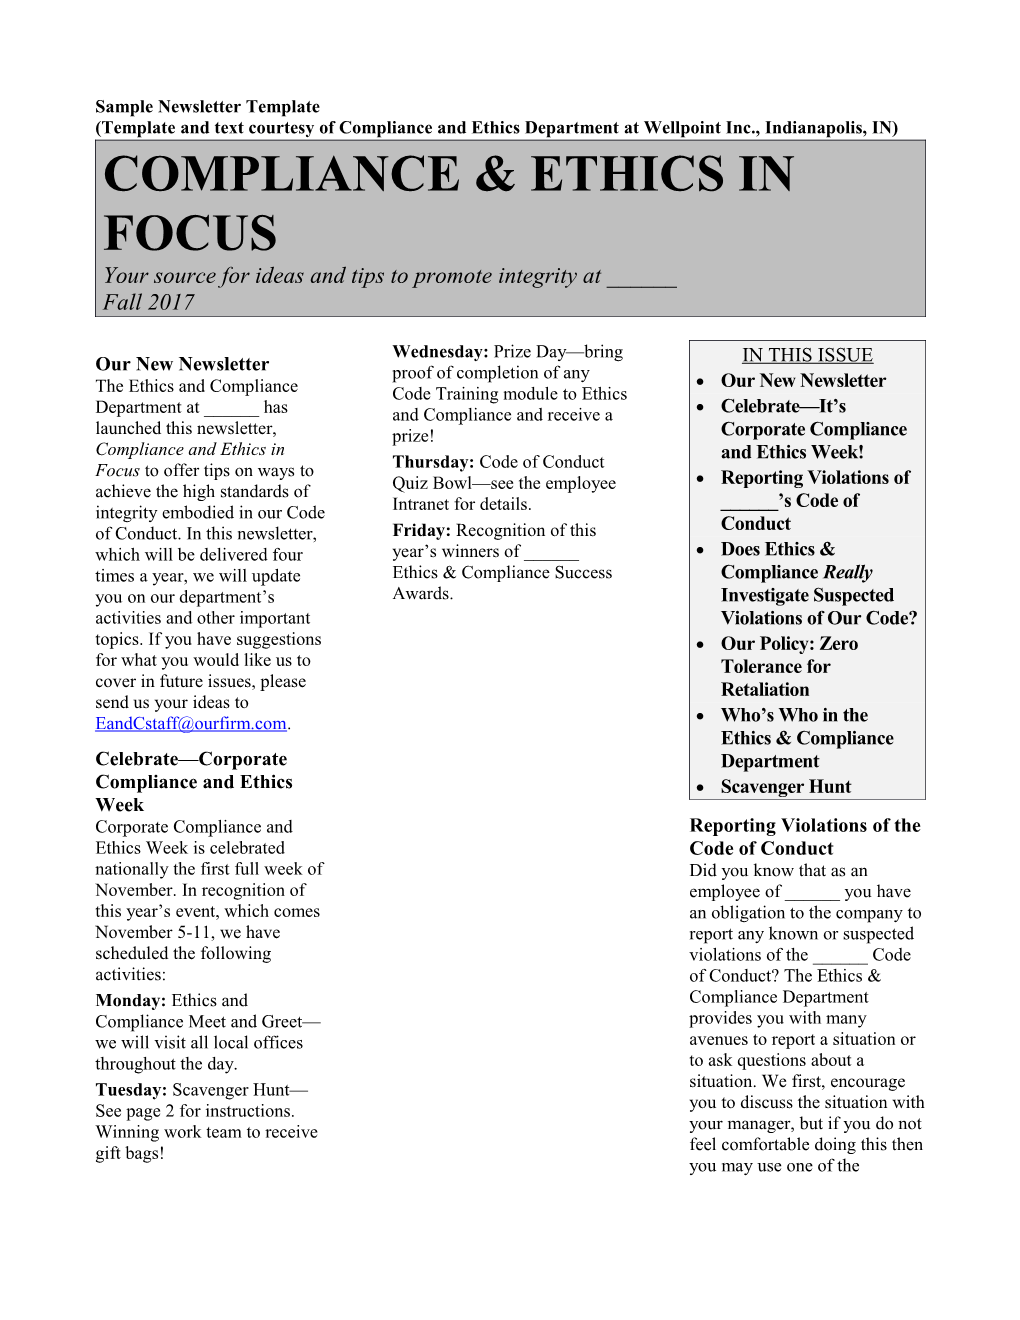 (Template and Text Courtesy of Compliance and Ethics Department at Wellpoint Inc